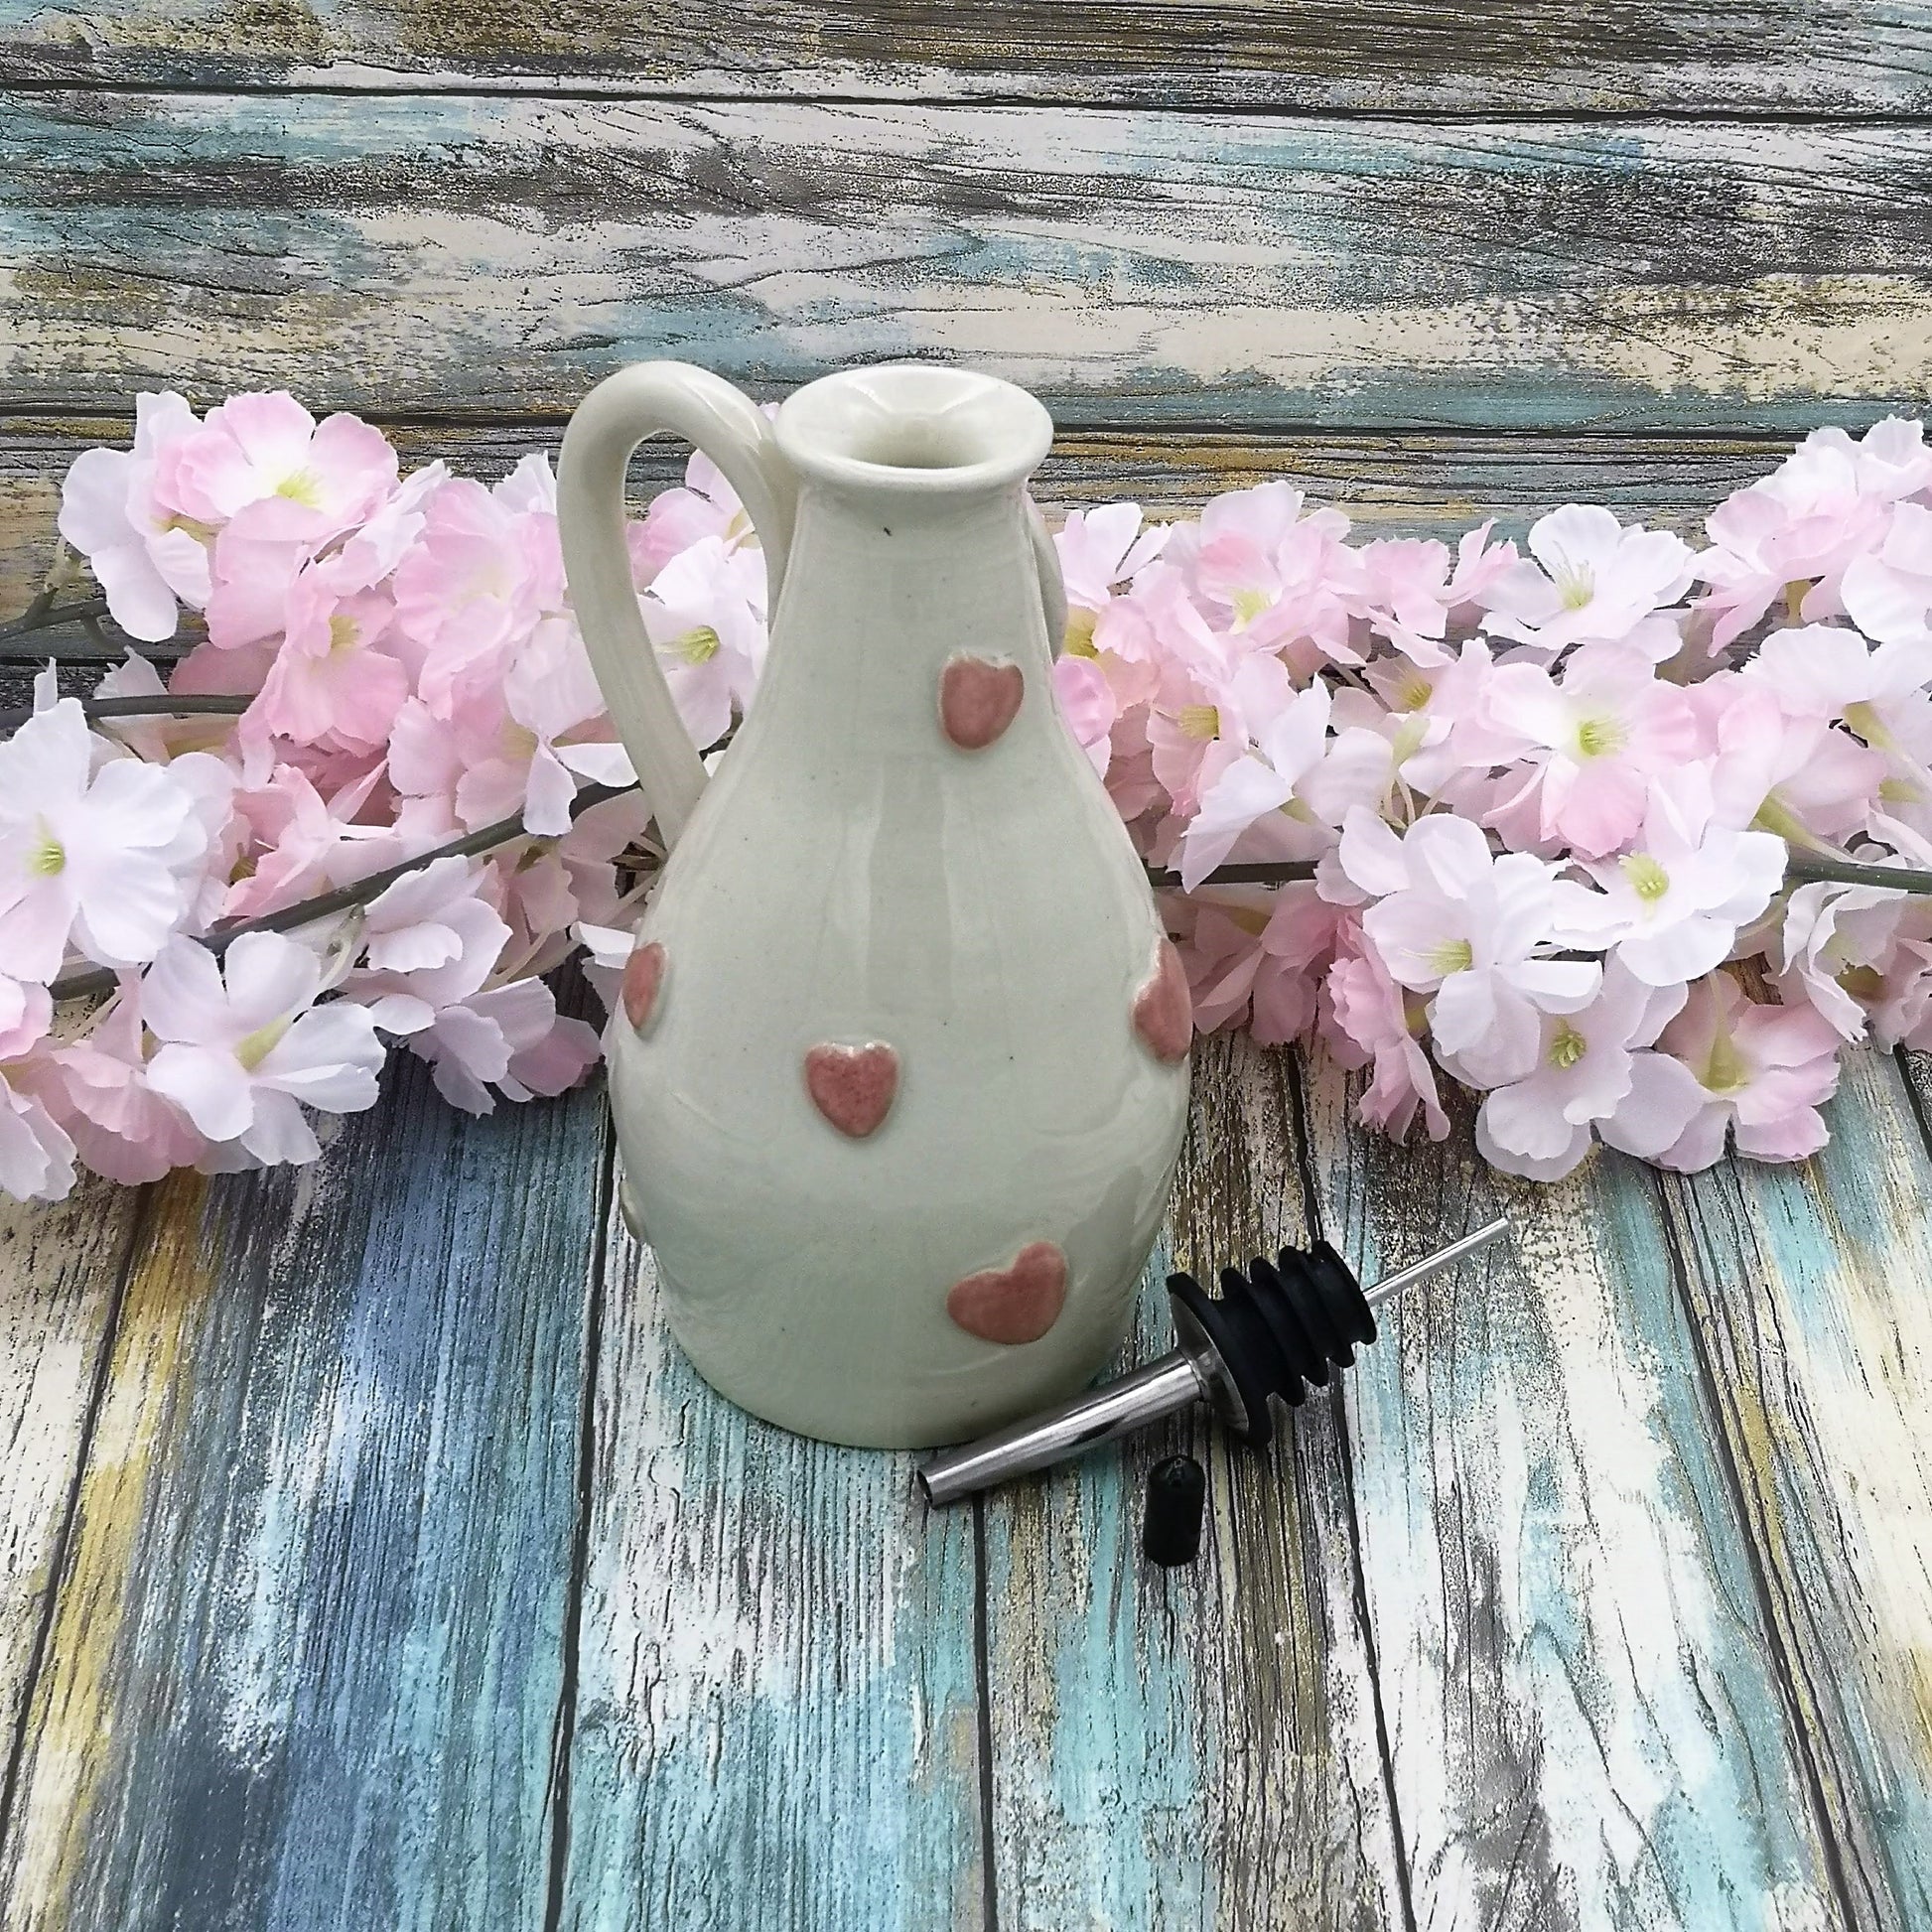 Handmade Ceramic Beige With Pink Hearts Olive Oil Dispenser, Stoneware Pottery Olive Oil Cruet, Decorative Bottles, Mothers Day Cooking Gift - Ceramica Ana Rafael